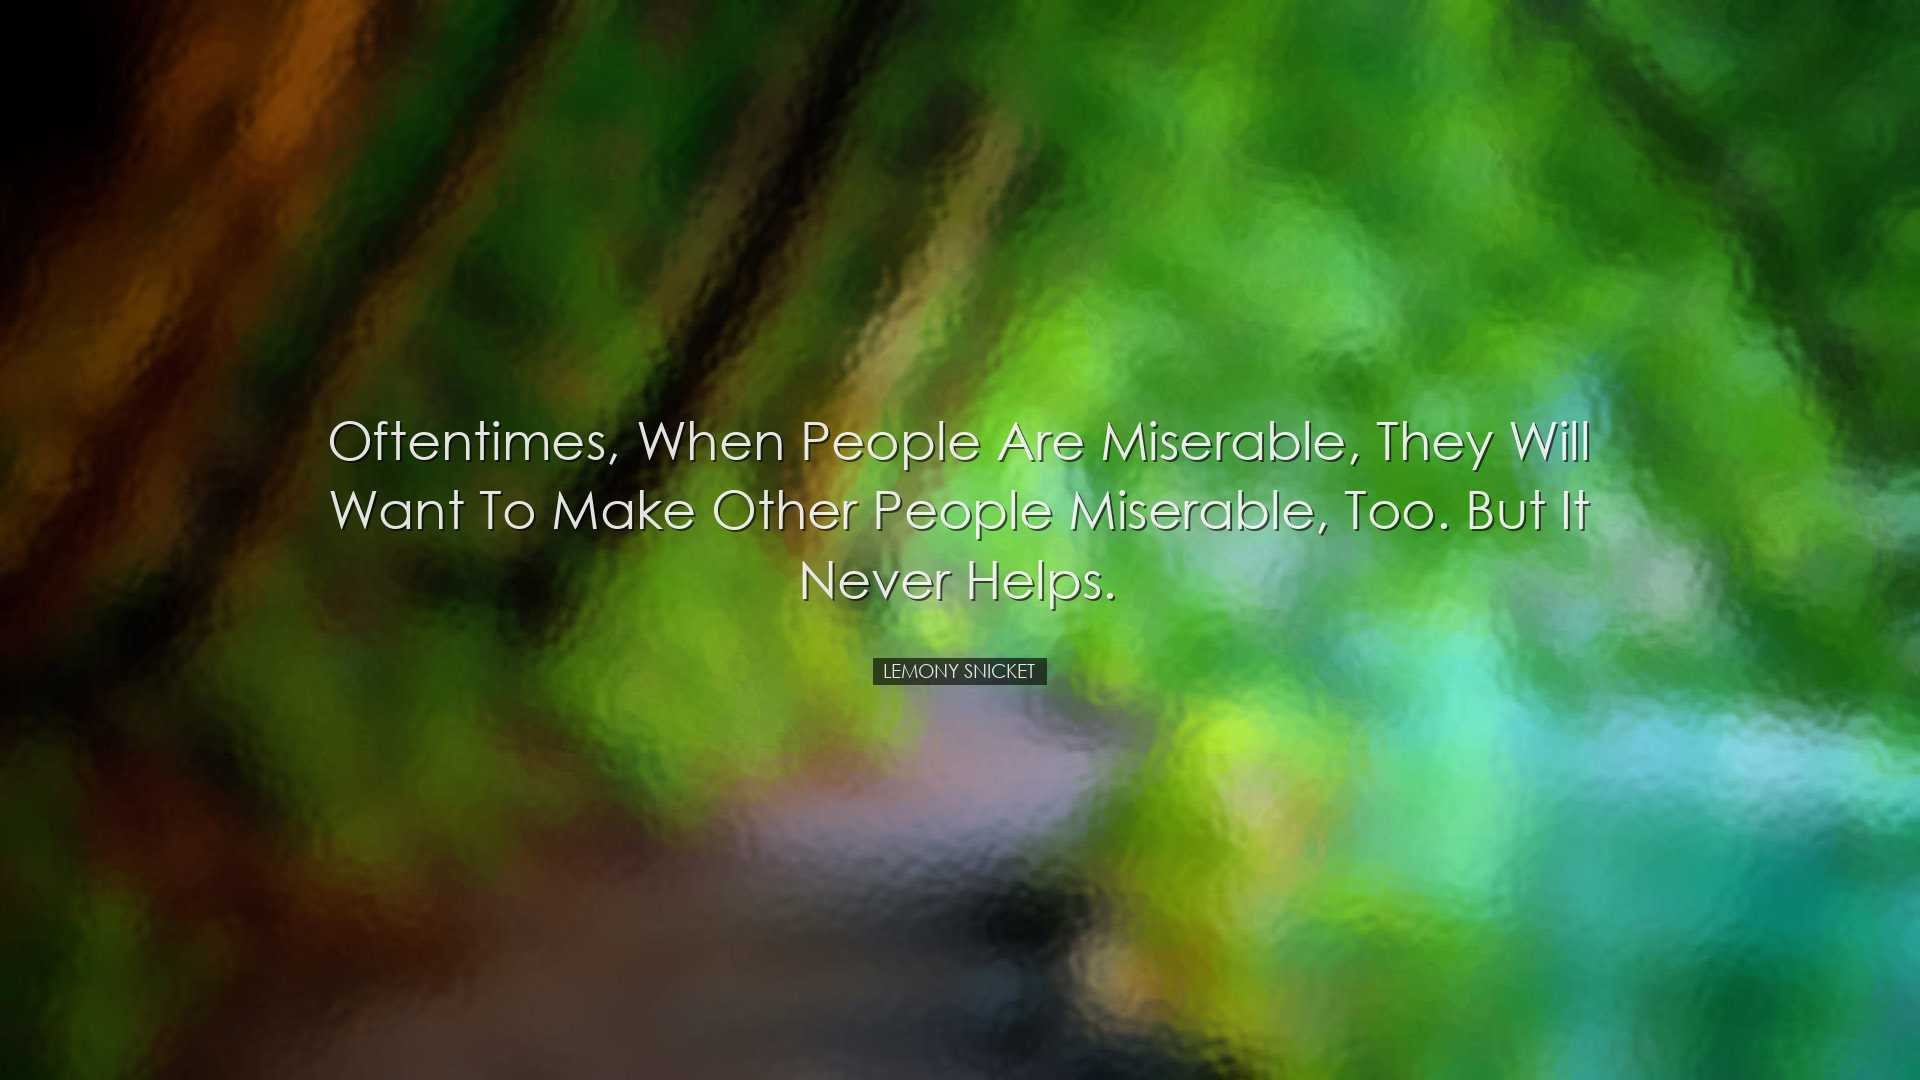 Oftentimes, when people are miserable, they will want to make othe